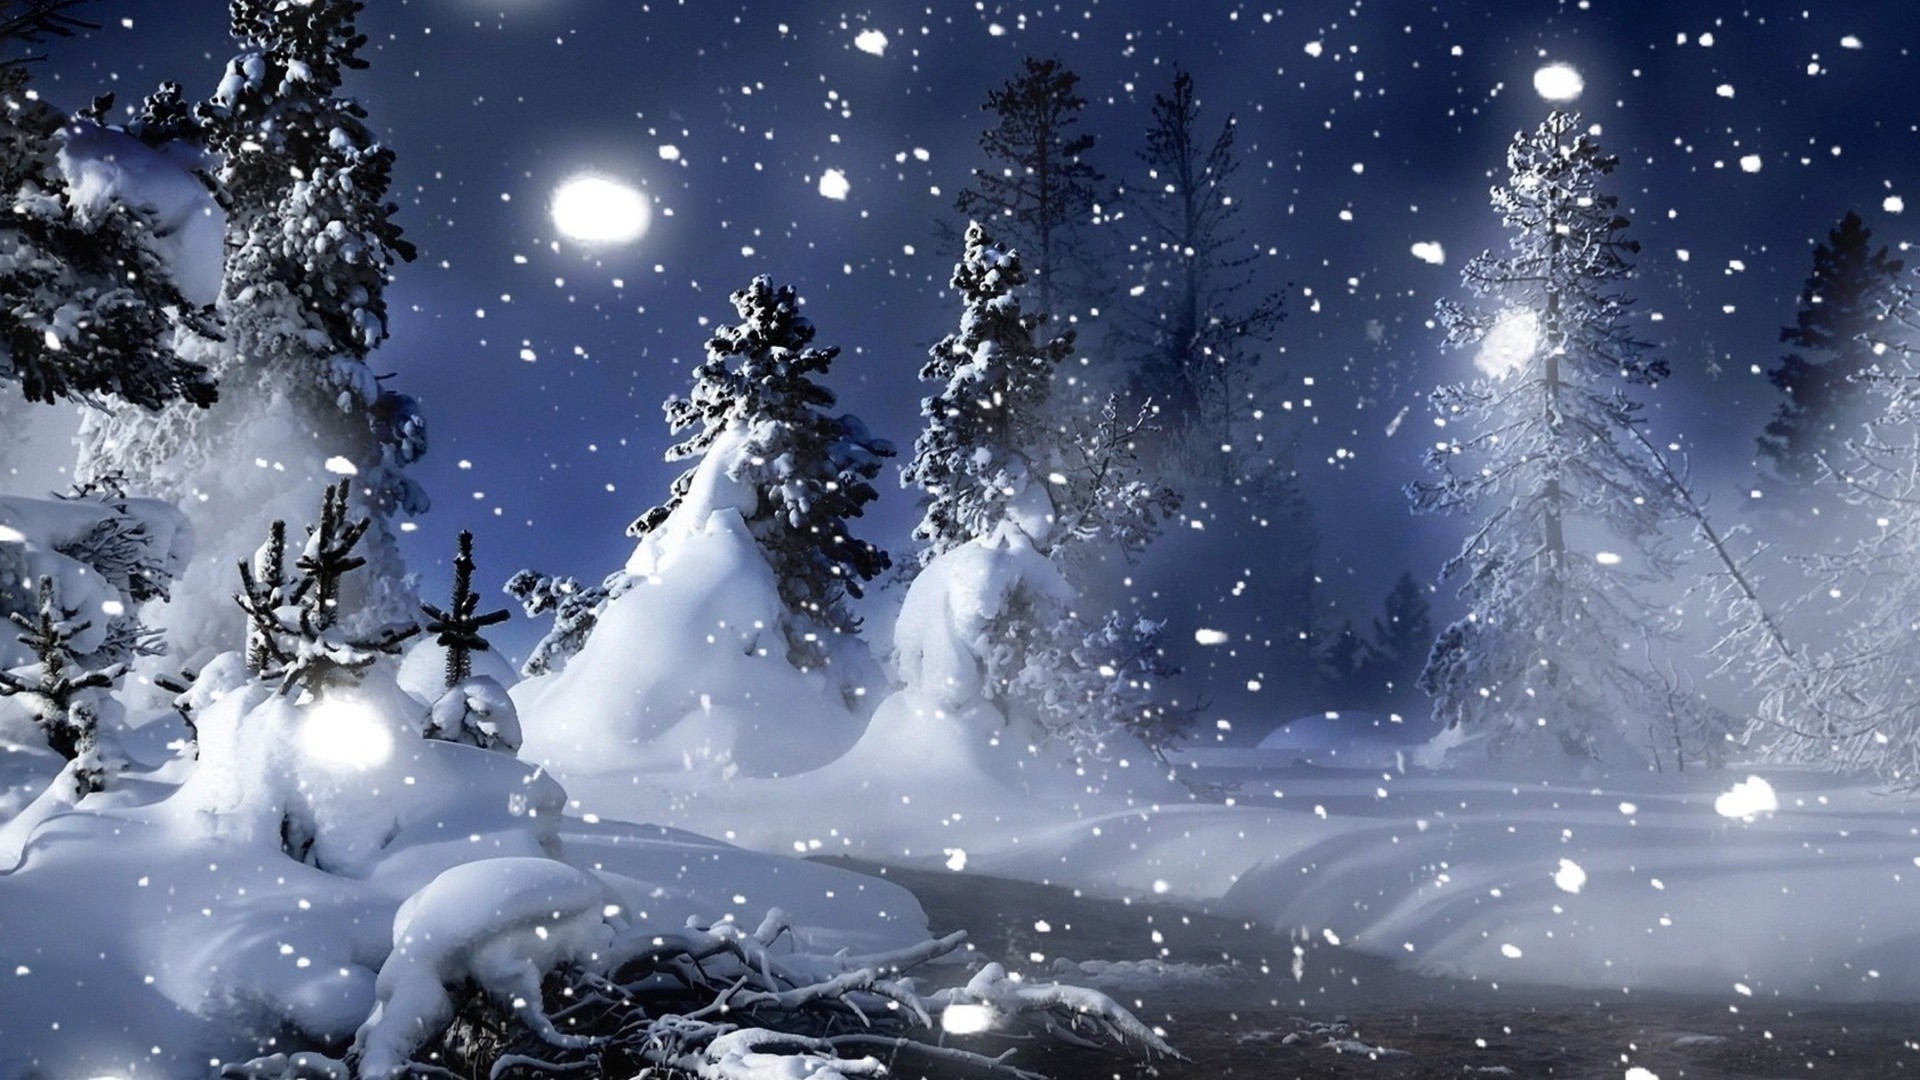 1920x1080 Right Click on this wallpapers: Xmas trees snowing snowflakes wallpaper to  download and select option "Save image as..."